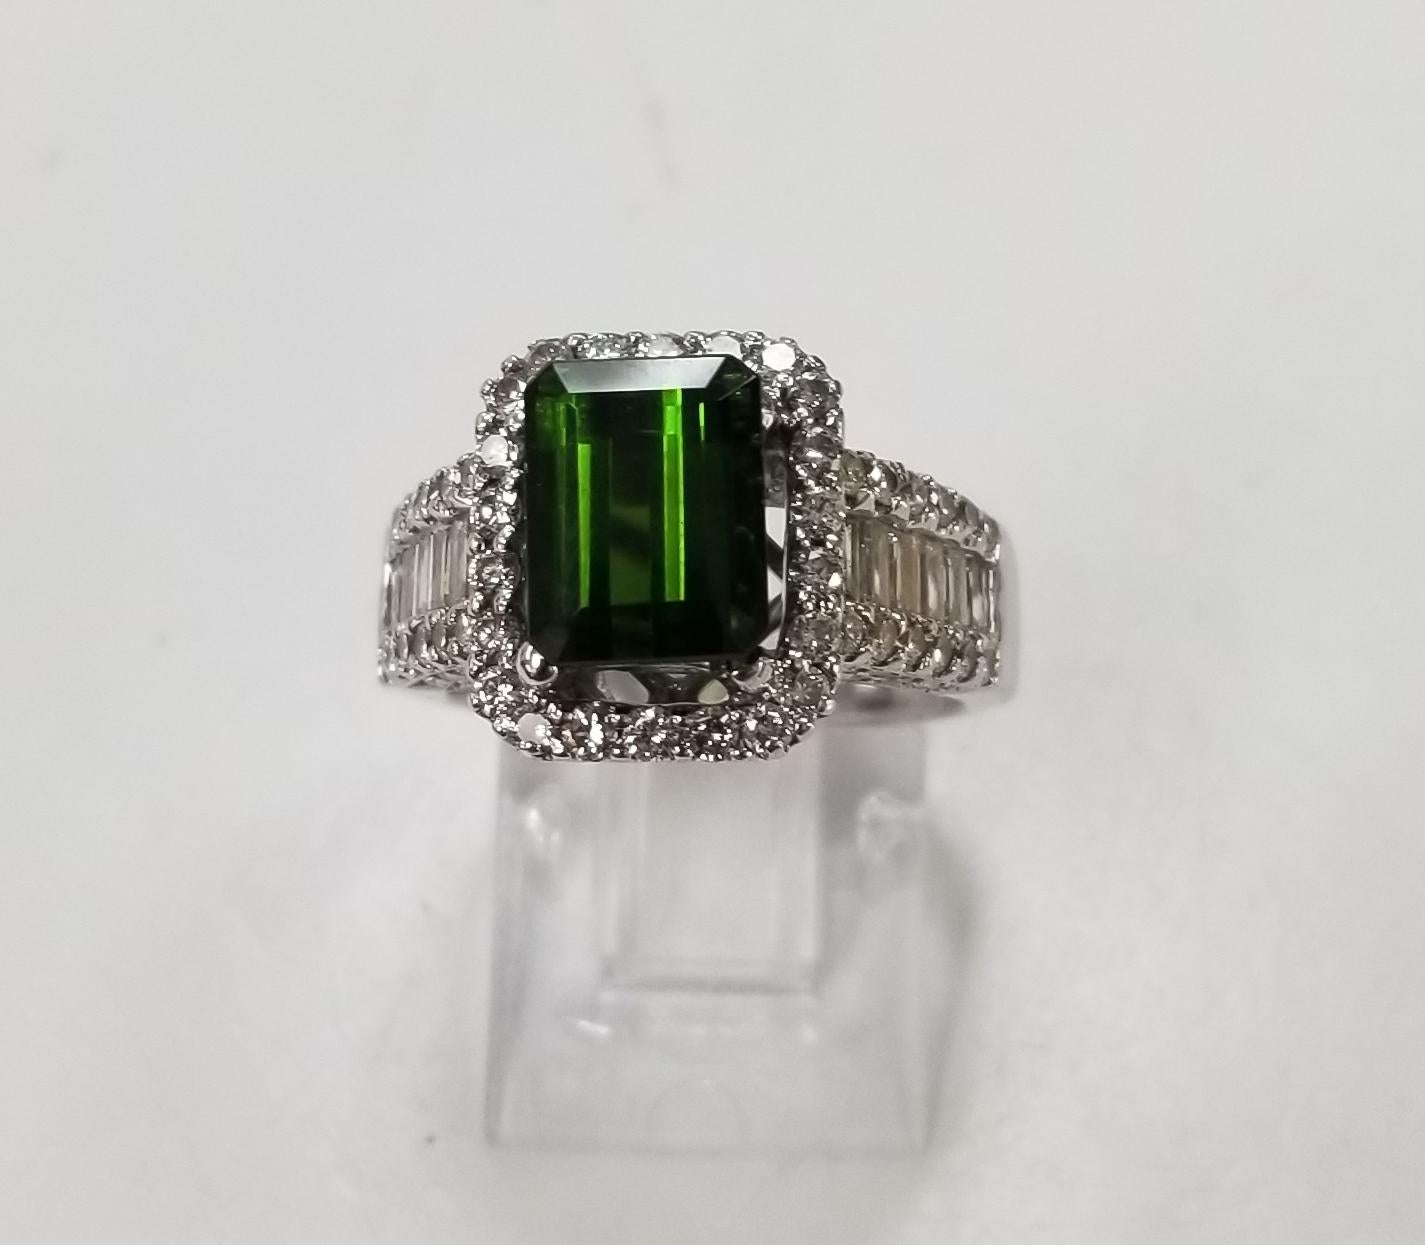 18k white gold Green Tourmaline and diamond halo ring, containing 1 green tourmaline of gem quality weighing 2.50cts. set with 12 baguette cut diamonds weighing .50pts. and 76 round full cut diamonds weighing .75pts. color 